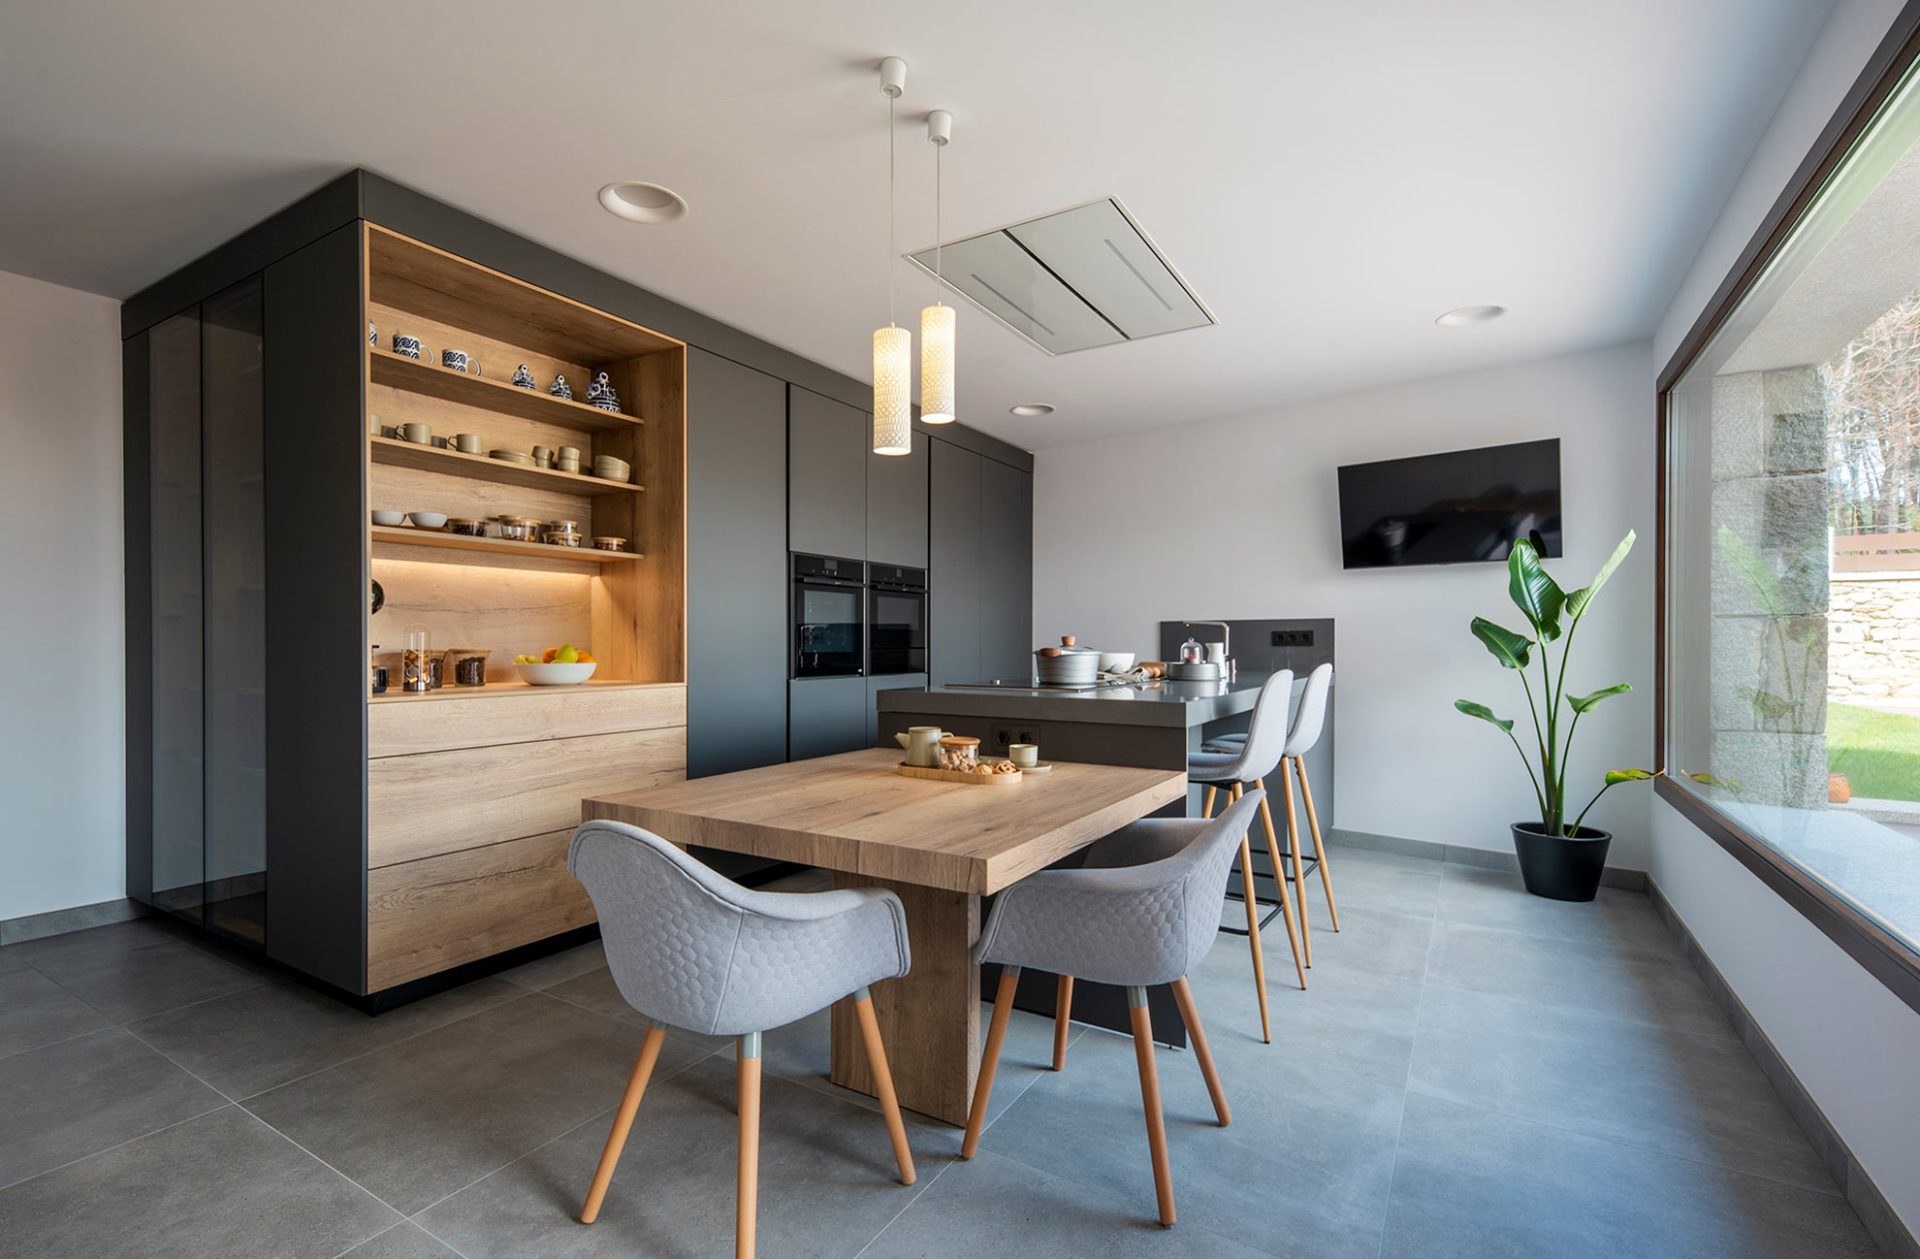 Galley kitchen-dining room in grey hues, with a peninsula integrating a breakfast bar and a wooden table attached.